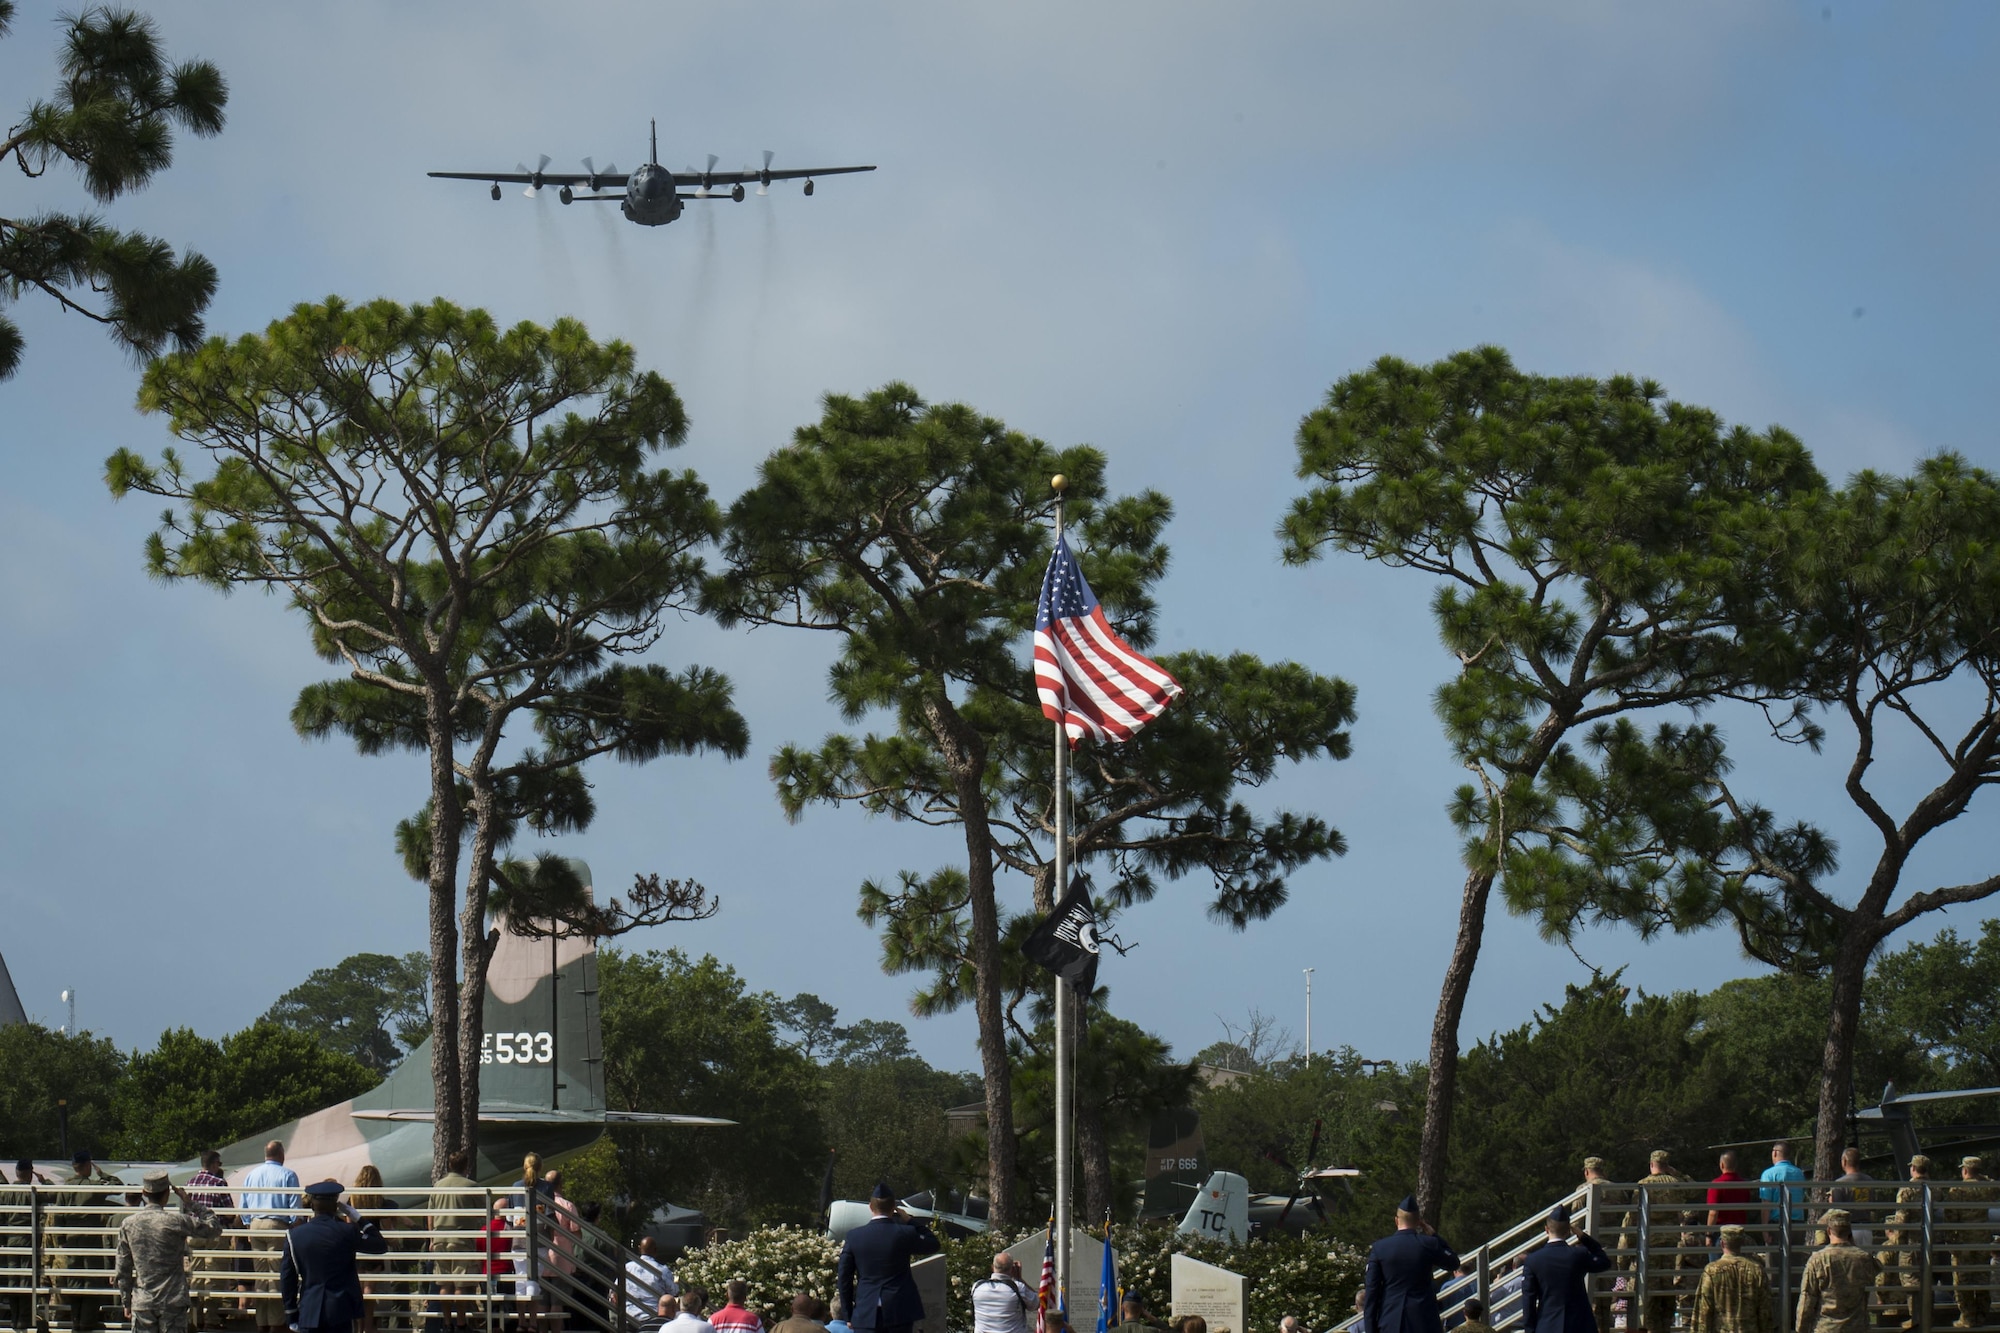 A 15th Special Operations Squadron MC-130H Combat Talon II flies over the Operation Eagle Claw memorial ceremony at Hurlburt Field, Fla., June 23, 2017. Operation Eagle Claw was an attempted hostage-rescue mission in 1980. The mission resulted in five, 8th Special Operations Squadron Airmen and three Marines sacrificing their lives when two of the involved aircraft collided at the Desert One staging site. (U.S. Air Force photo by Airman 1st Class Joseph Pick)